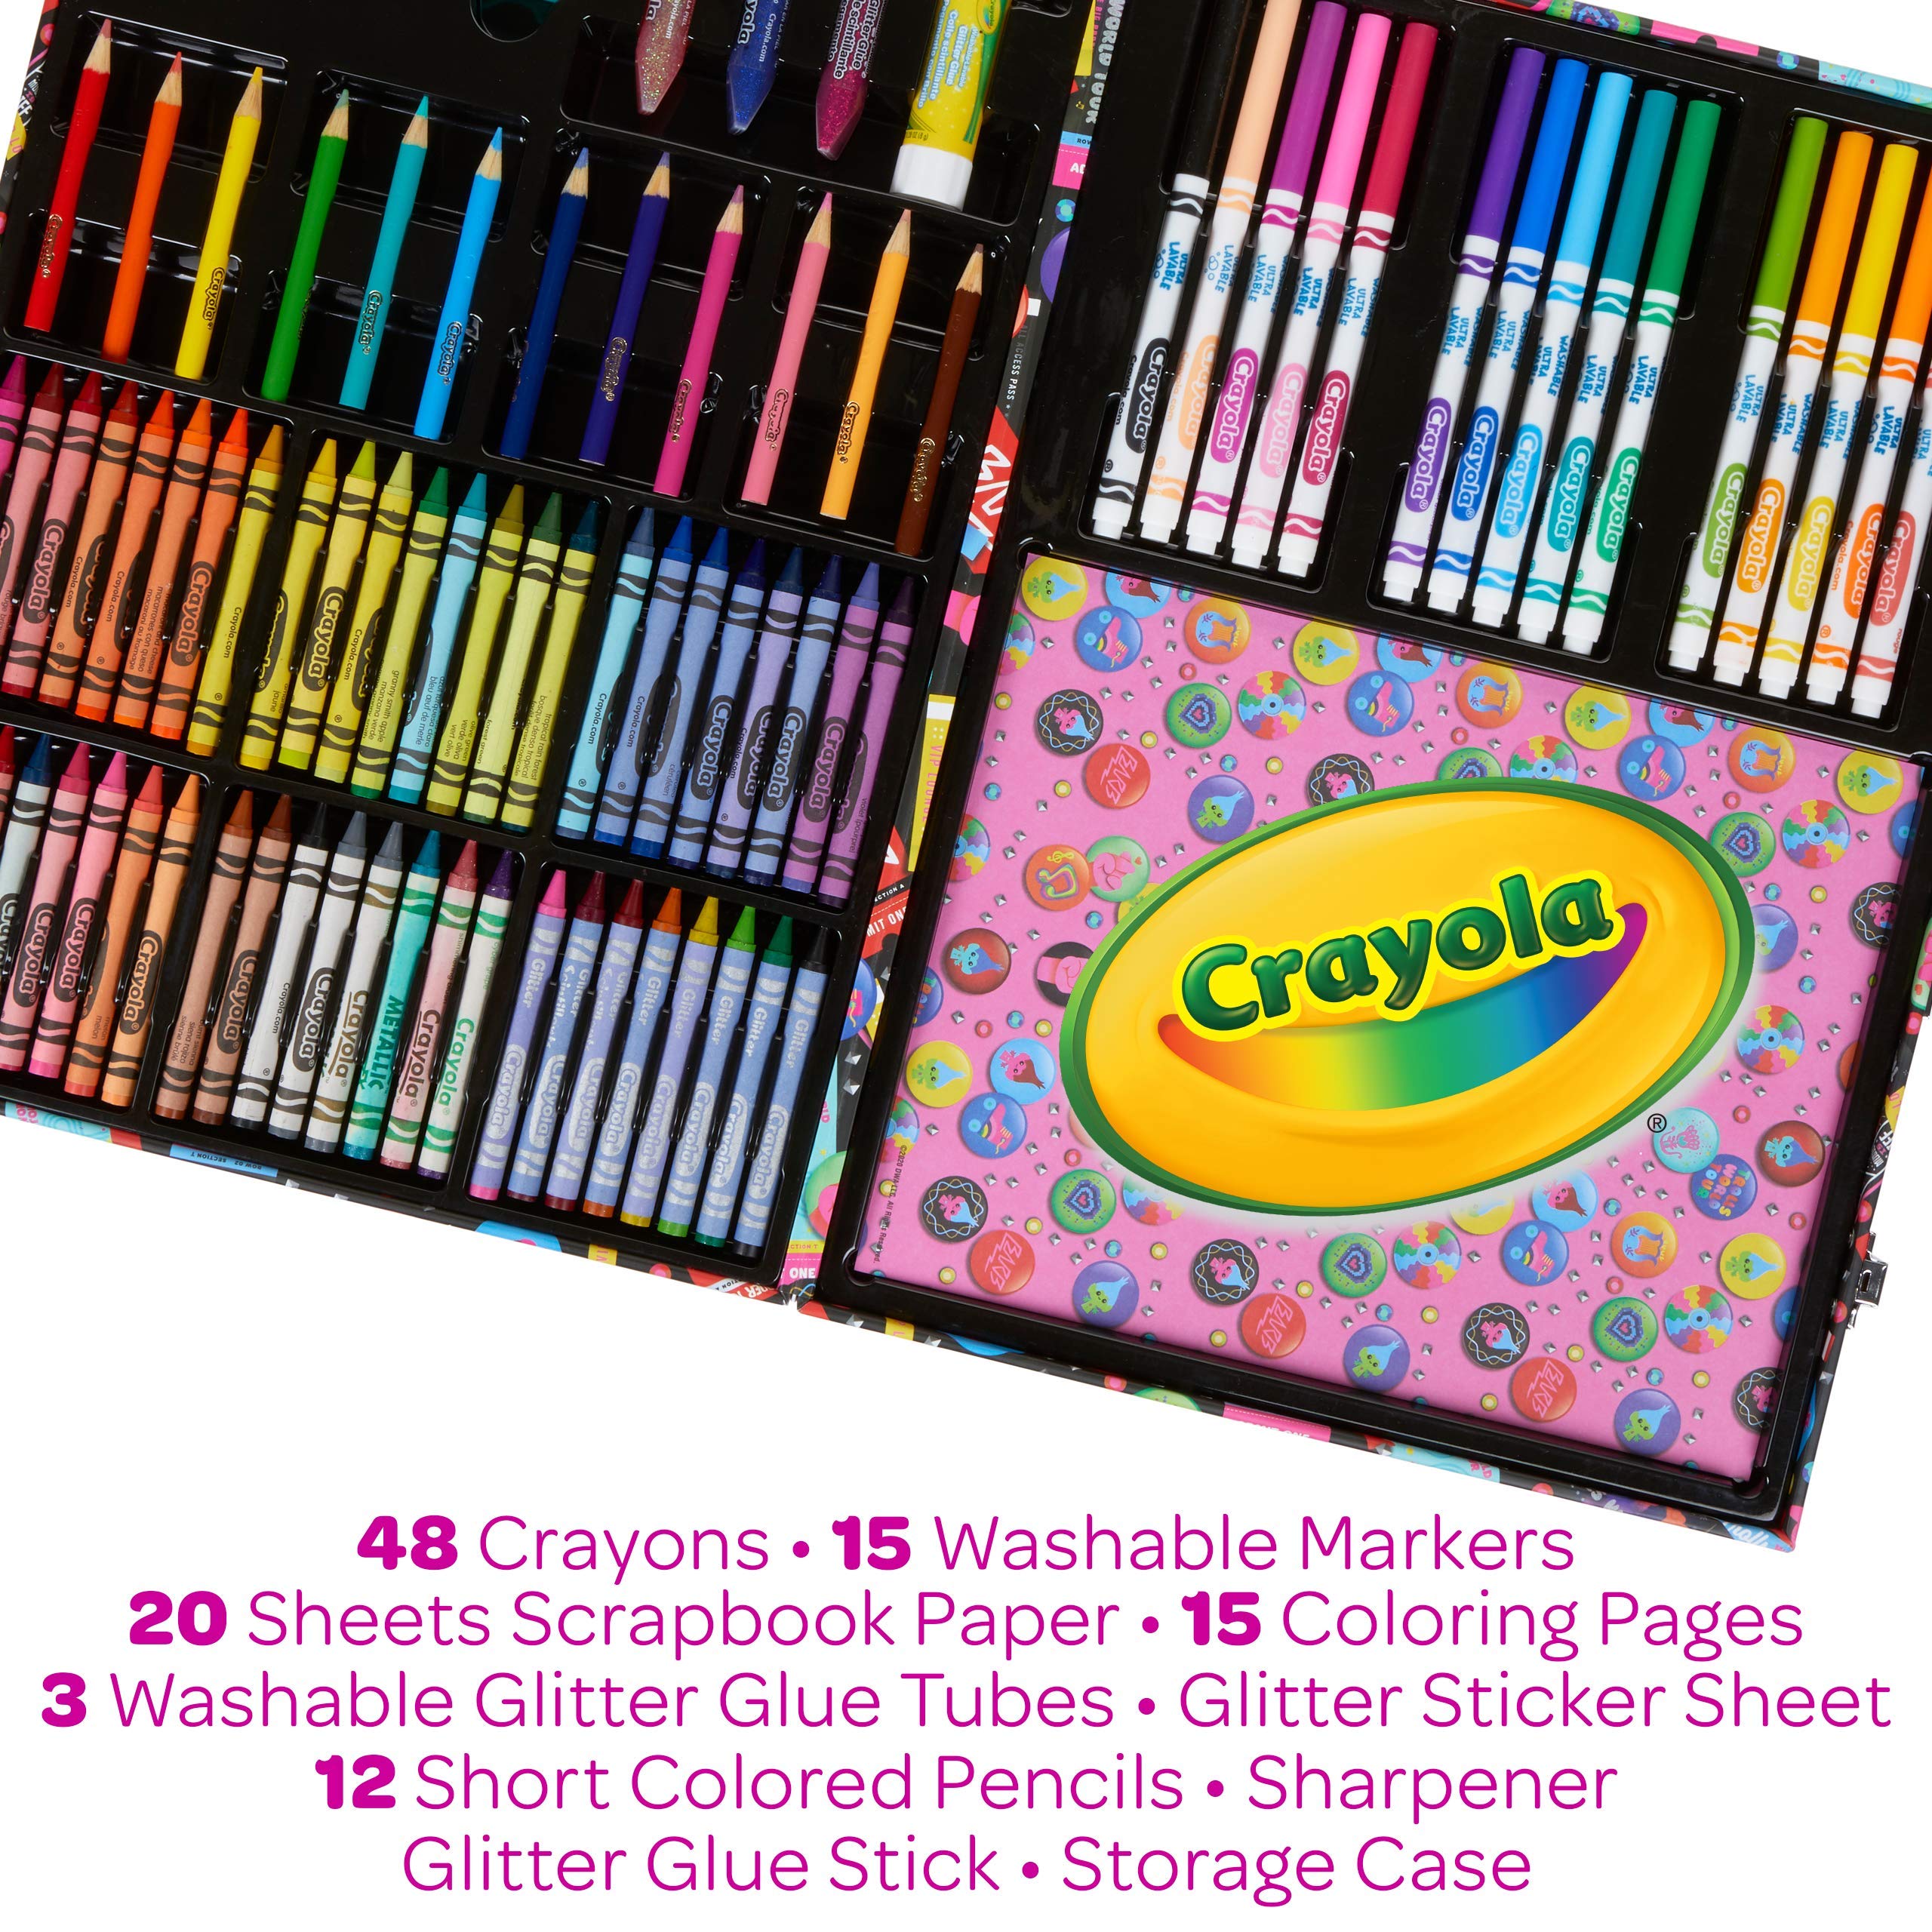 Crayola Trolls World Tour Inspiration Art Case, Over 110 Pieces, Art Set, Gifts for Kids, Age 5, 6, 7, 8